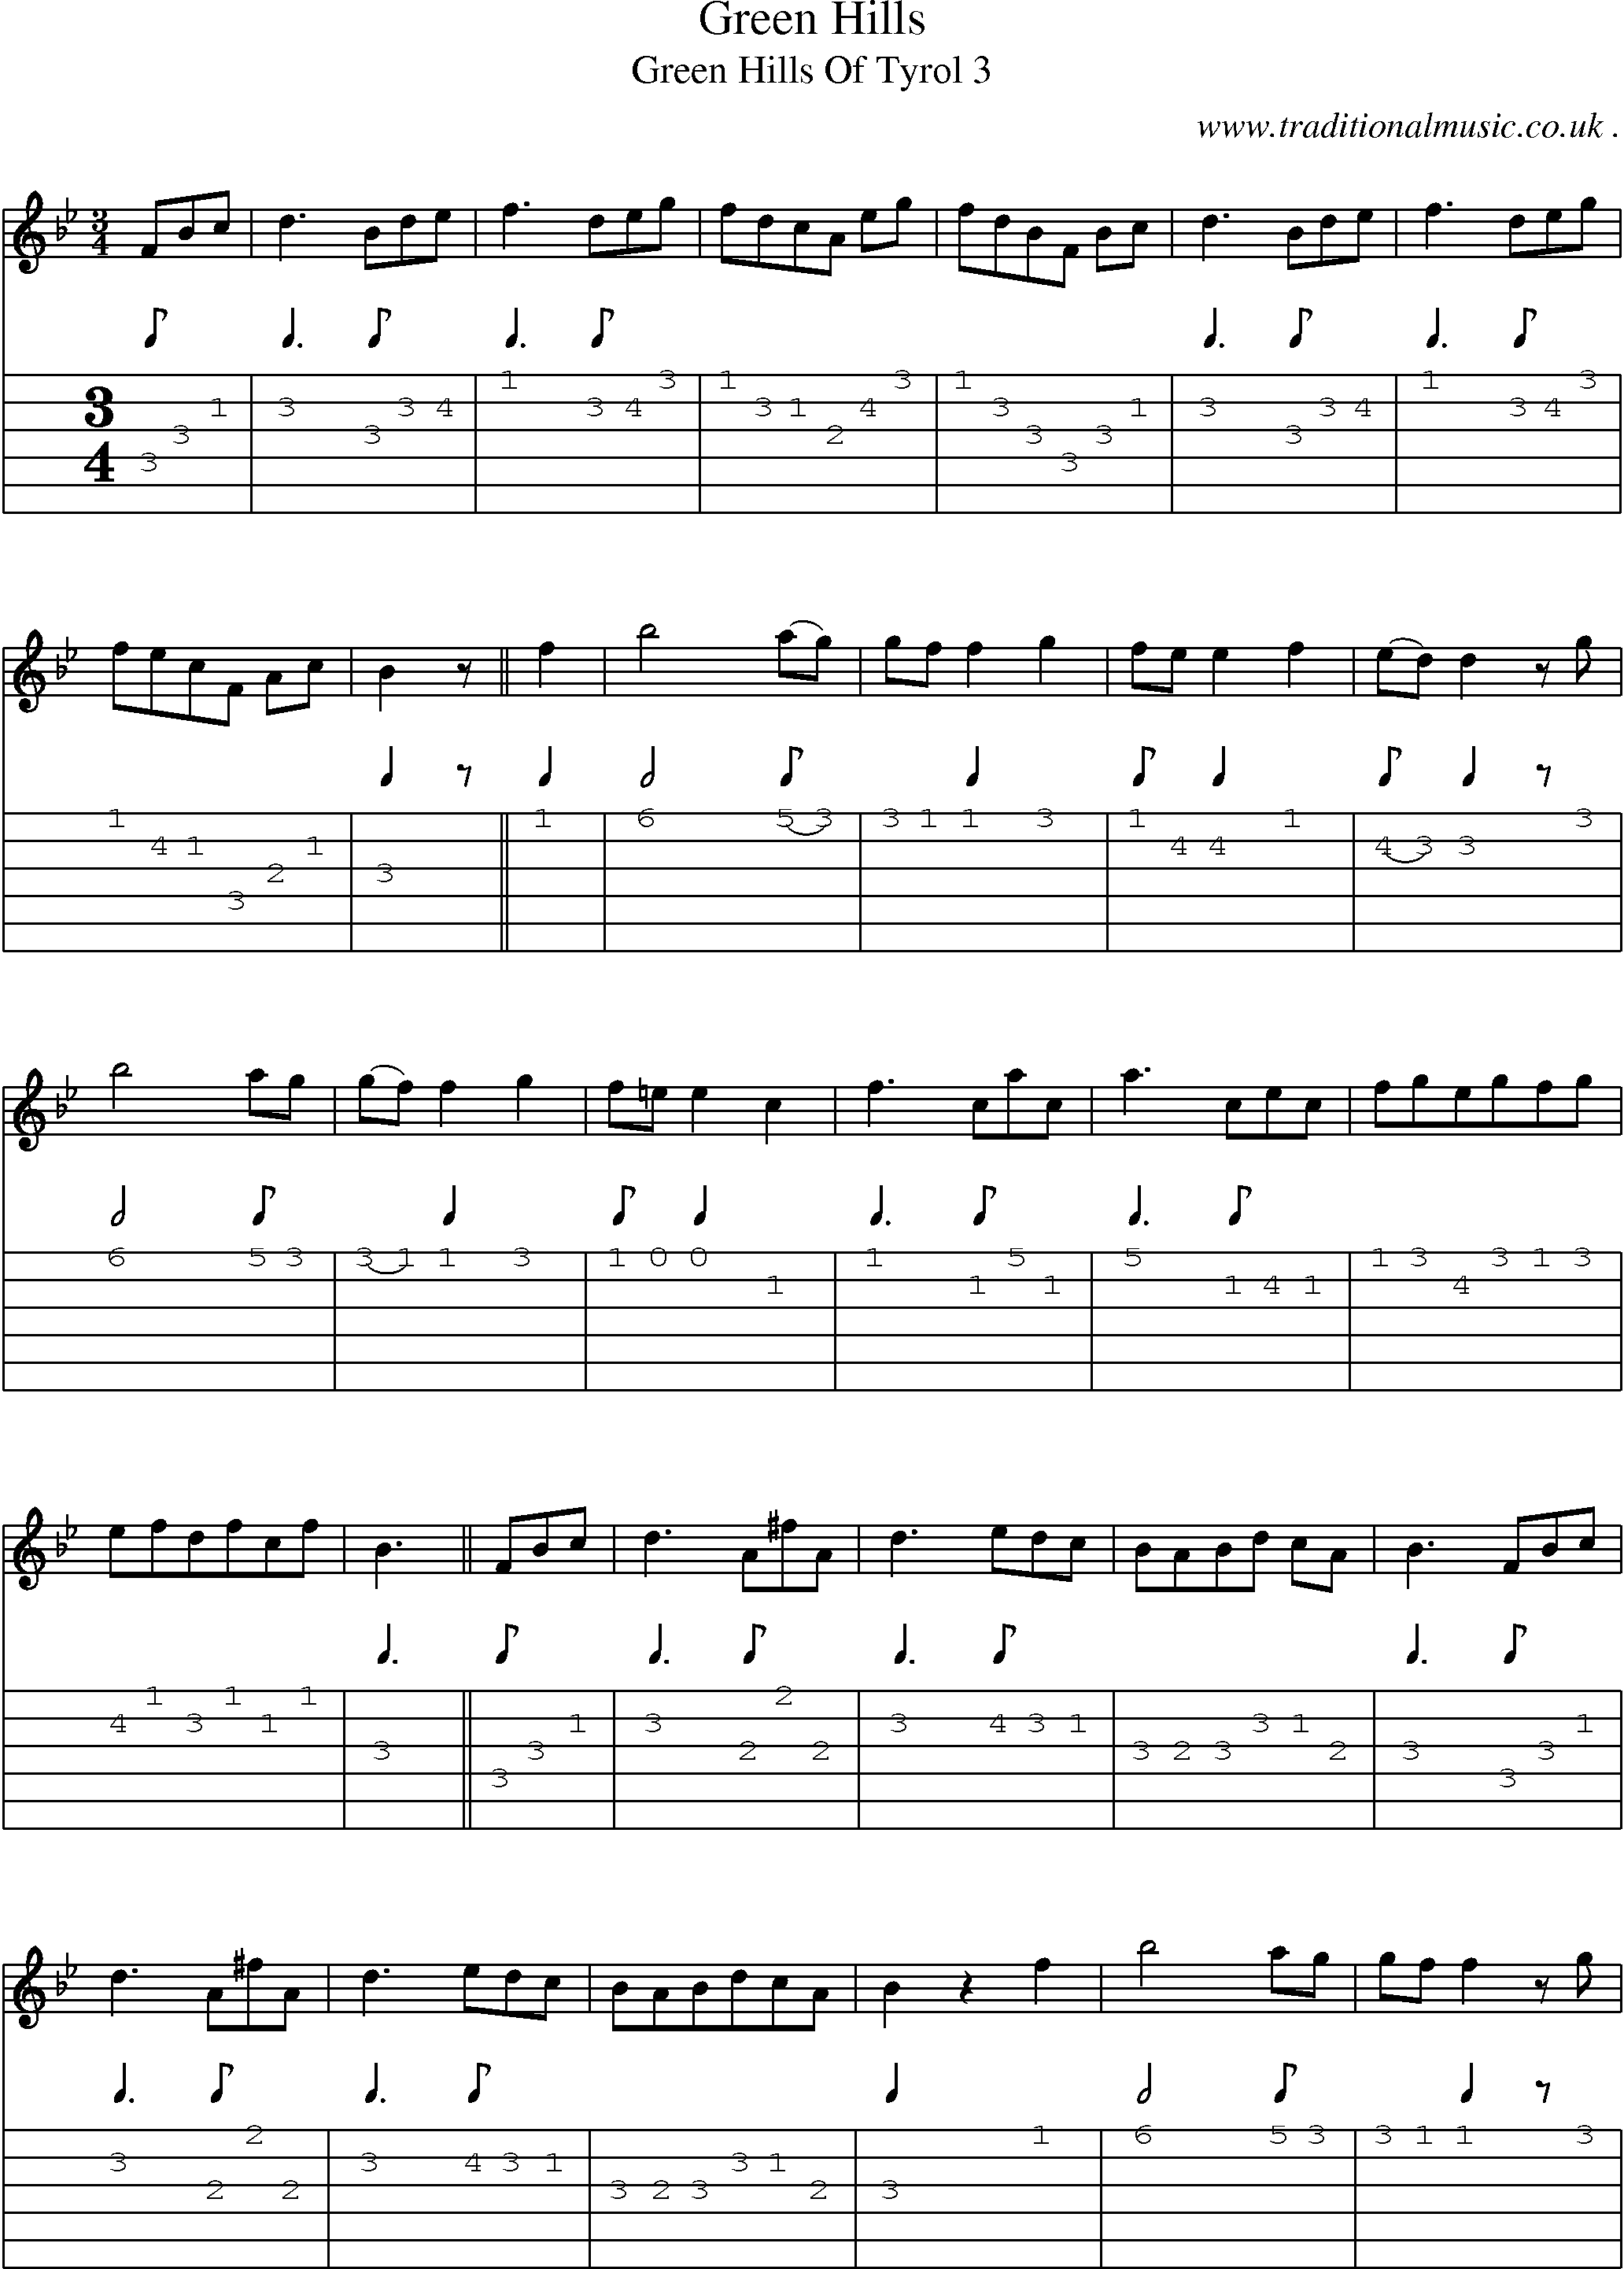 Sheet-Music and Guitar Tabs for Green Hills